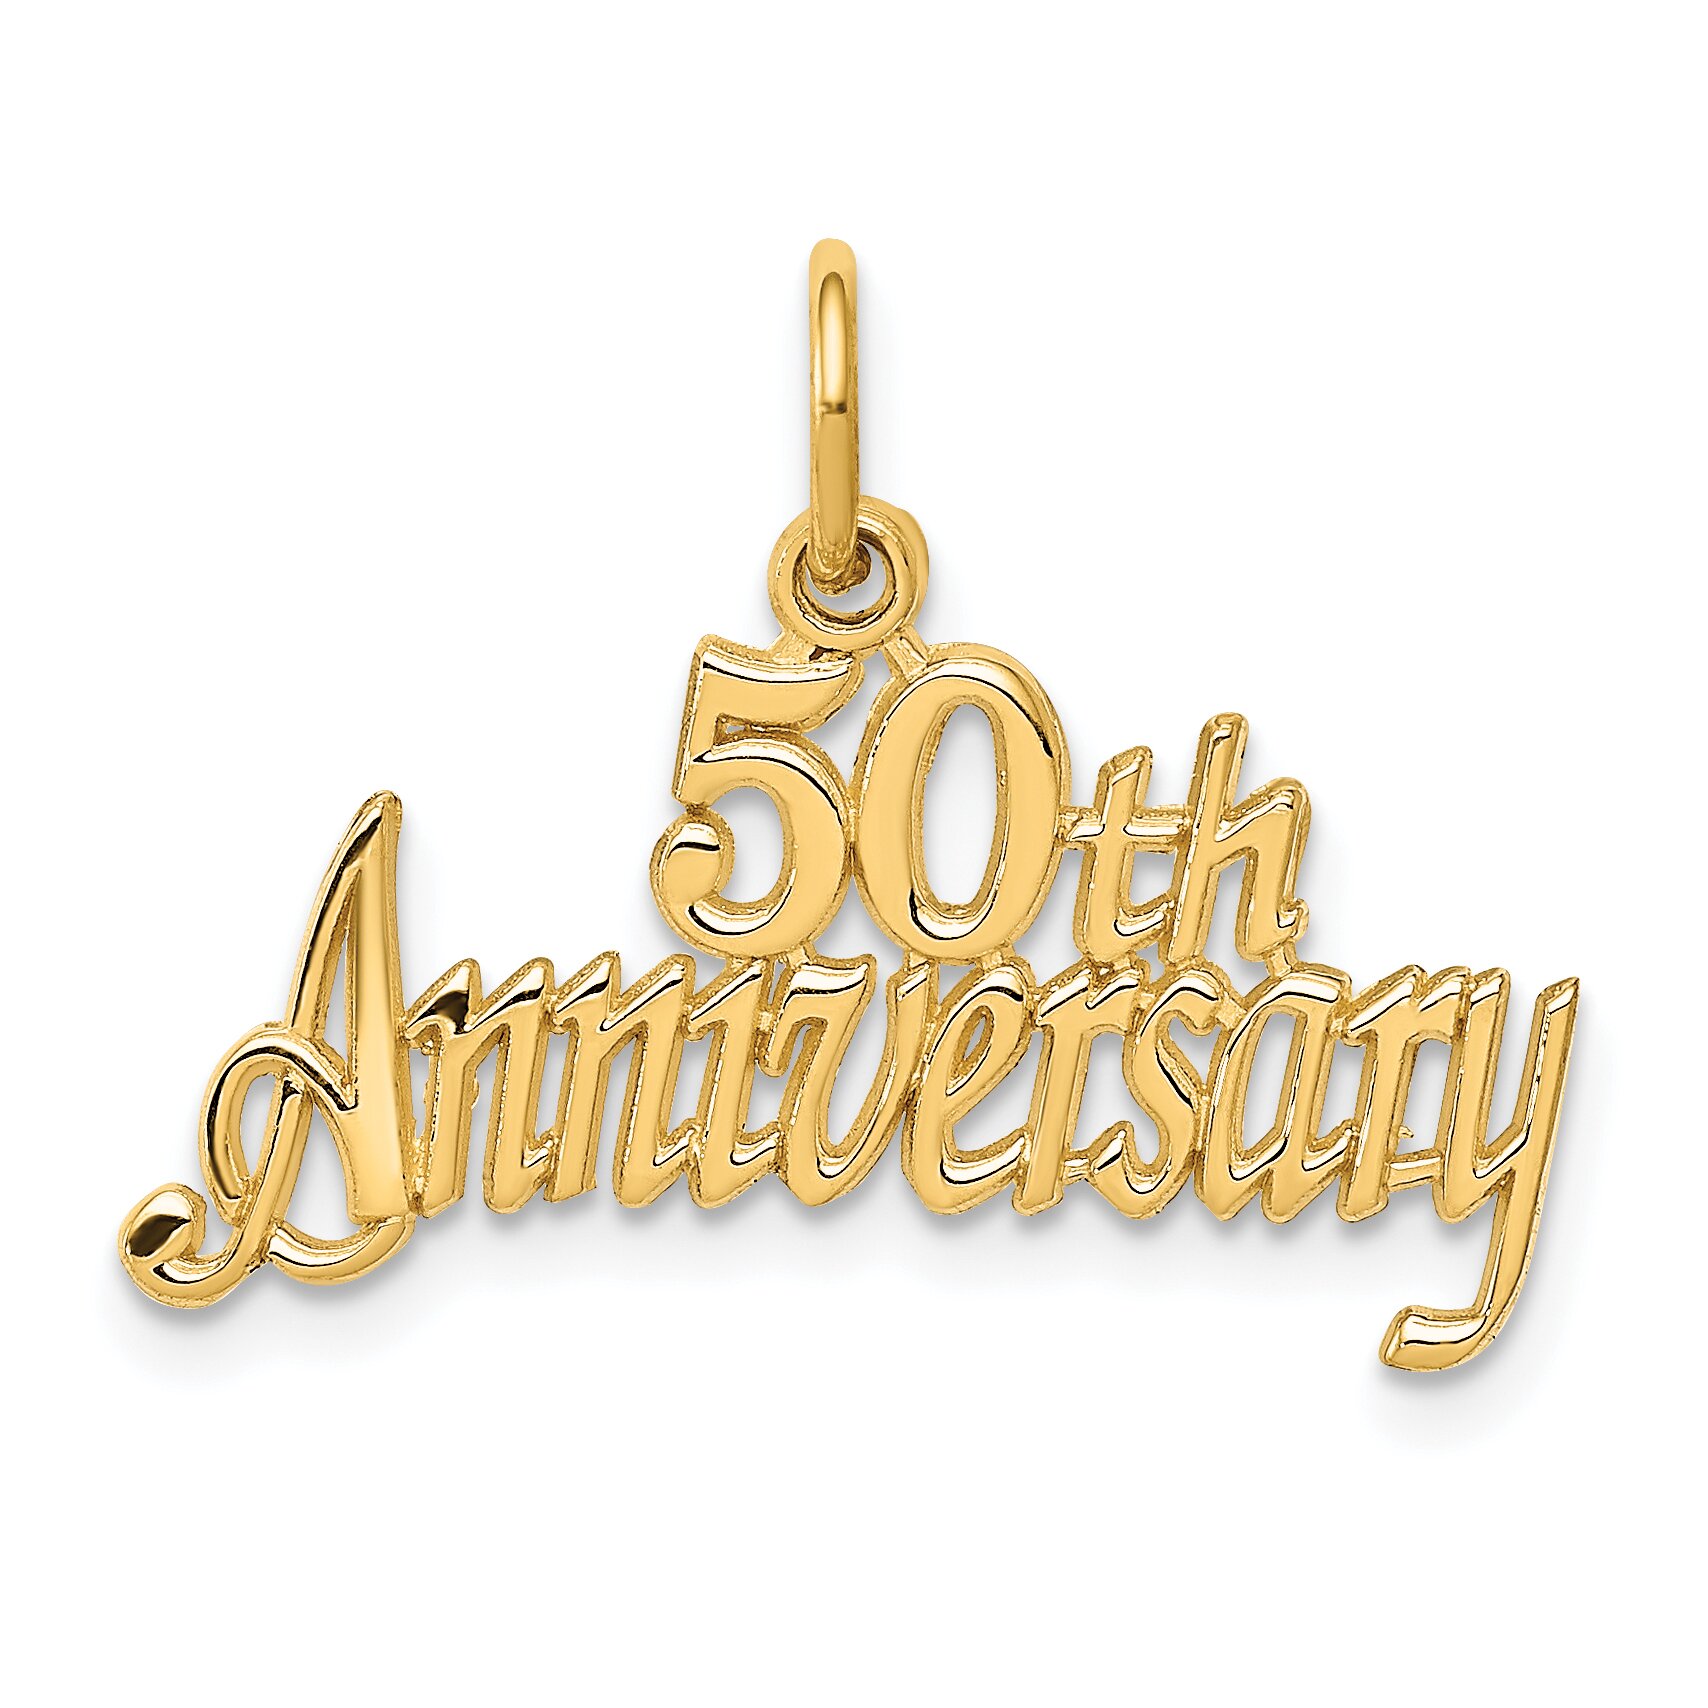 Findingking 14K Gold 50th Anniversary Charm